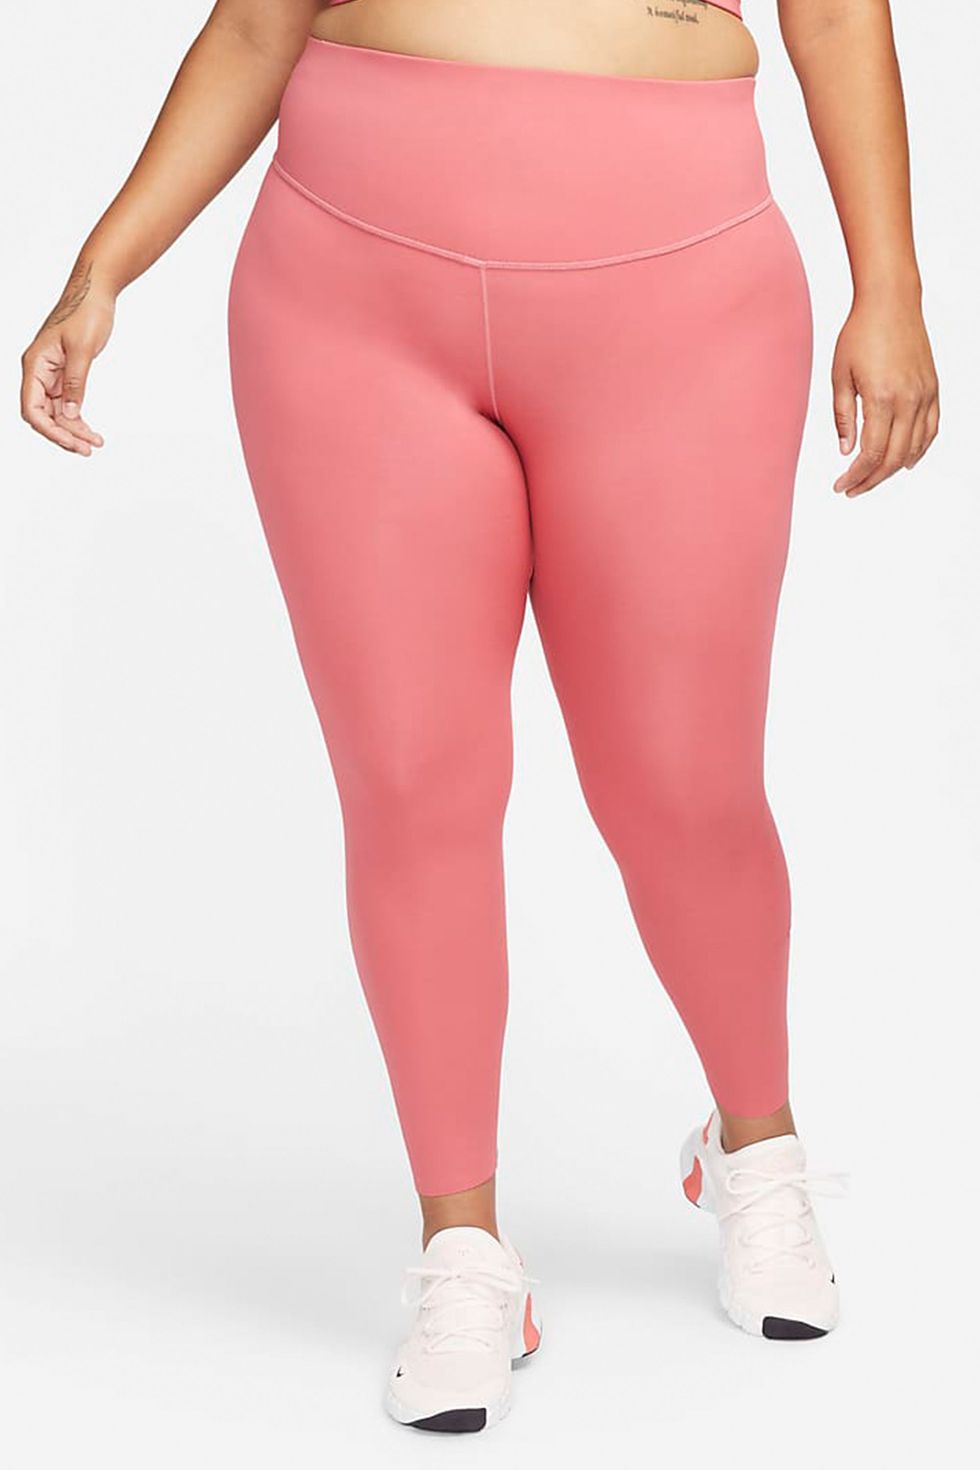 Is That The New Workout Leggings Seamless Medium-Impact Wide